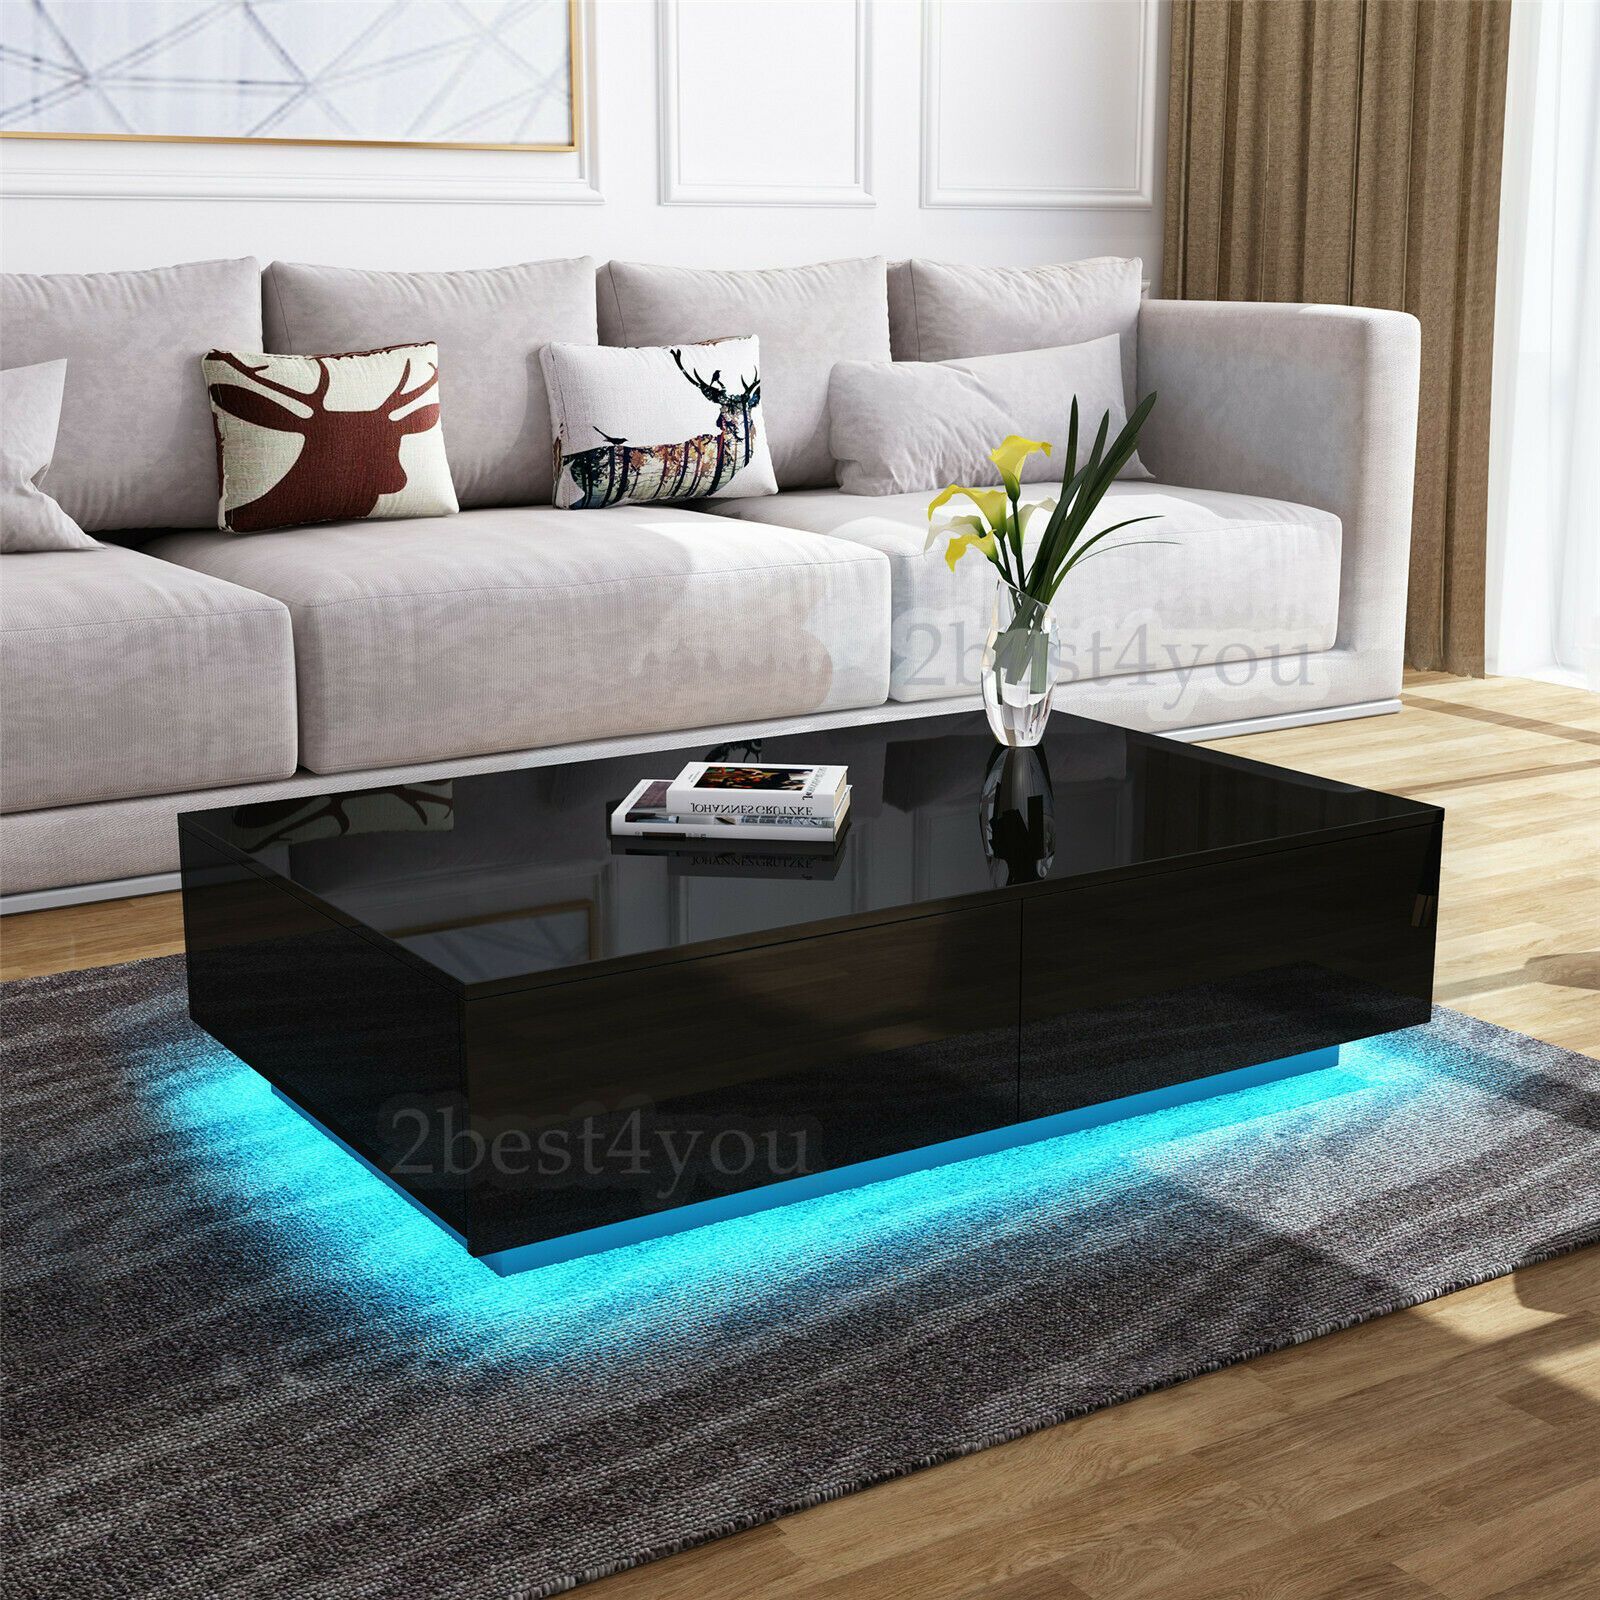 Modern Coffee Table With Led Lights – Stellabracy With Regard To Coffee Tables With Led Lights (View 9 of 20)